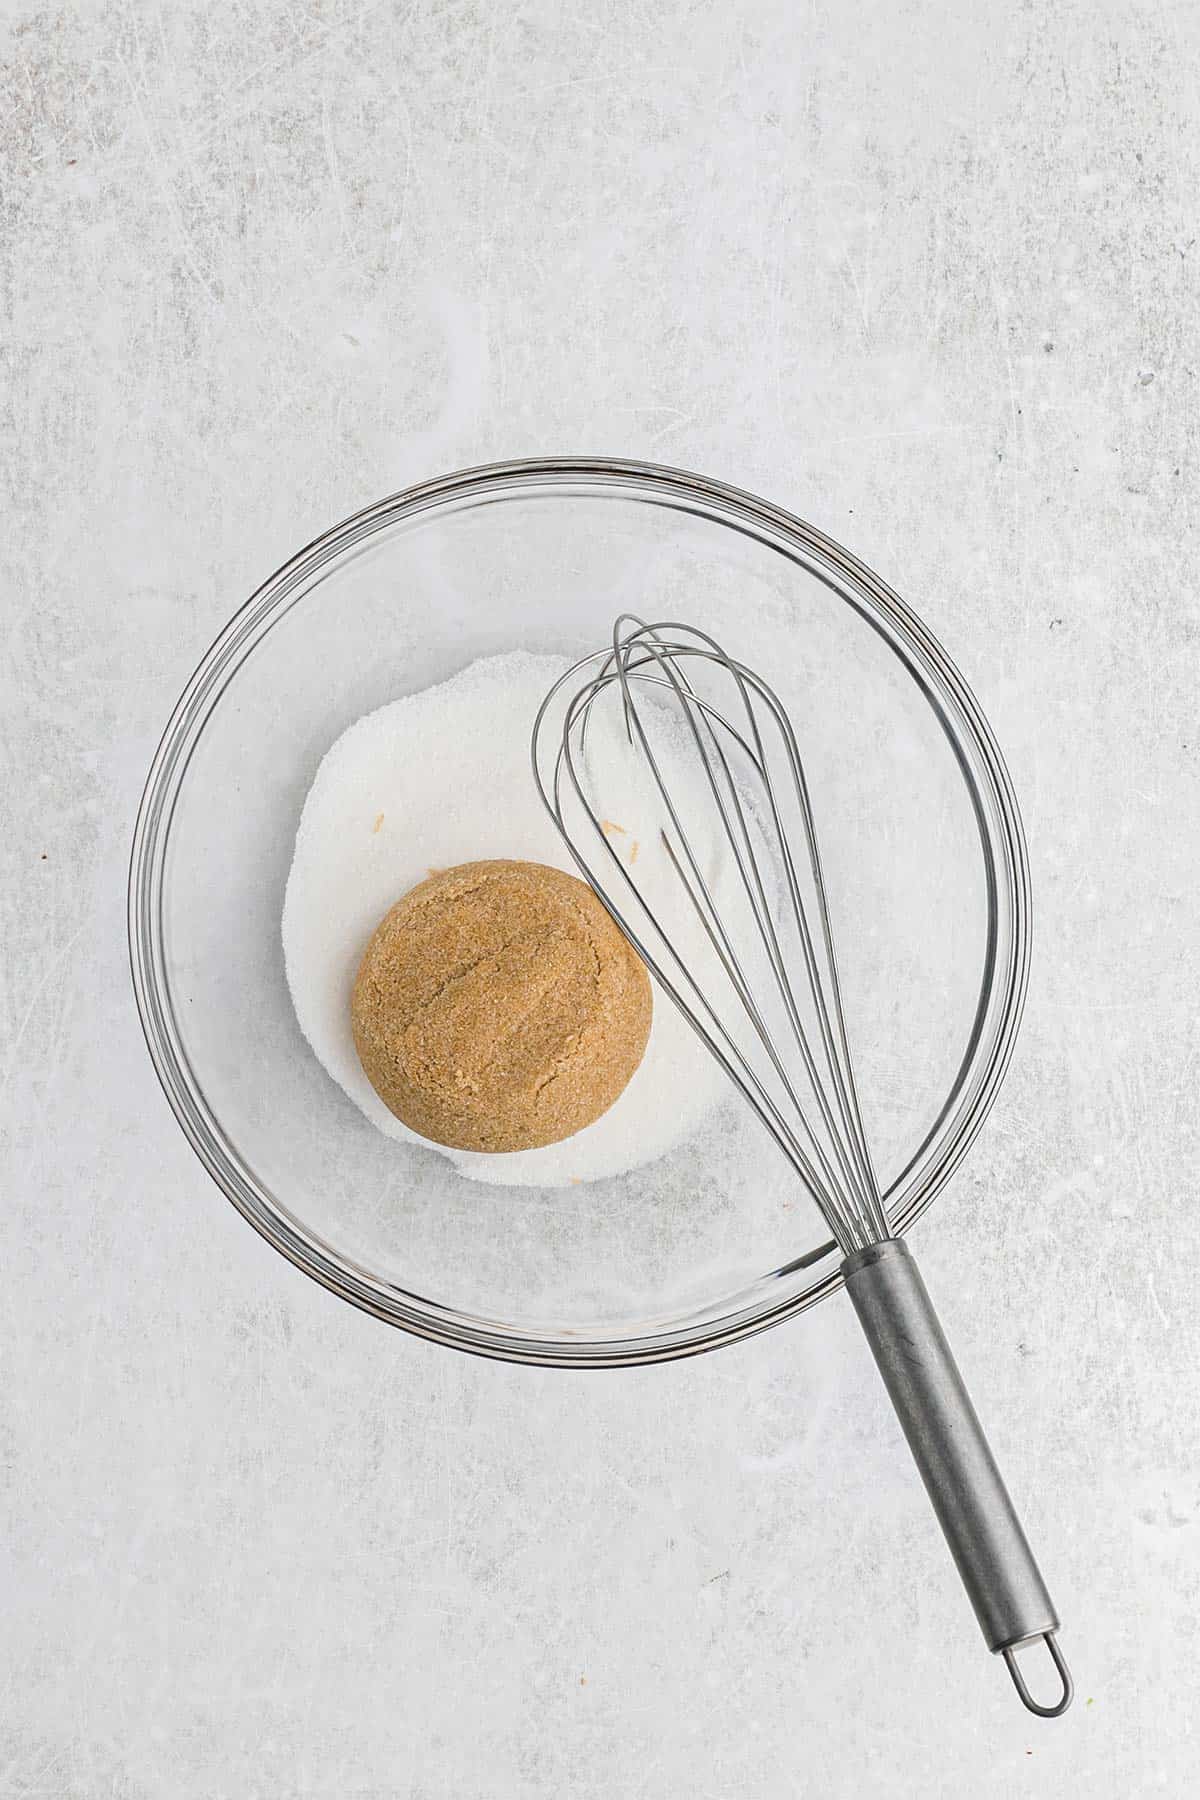 White and brown sugar in a bowl with a whisk.